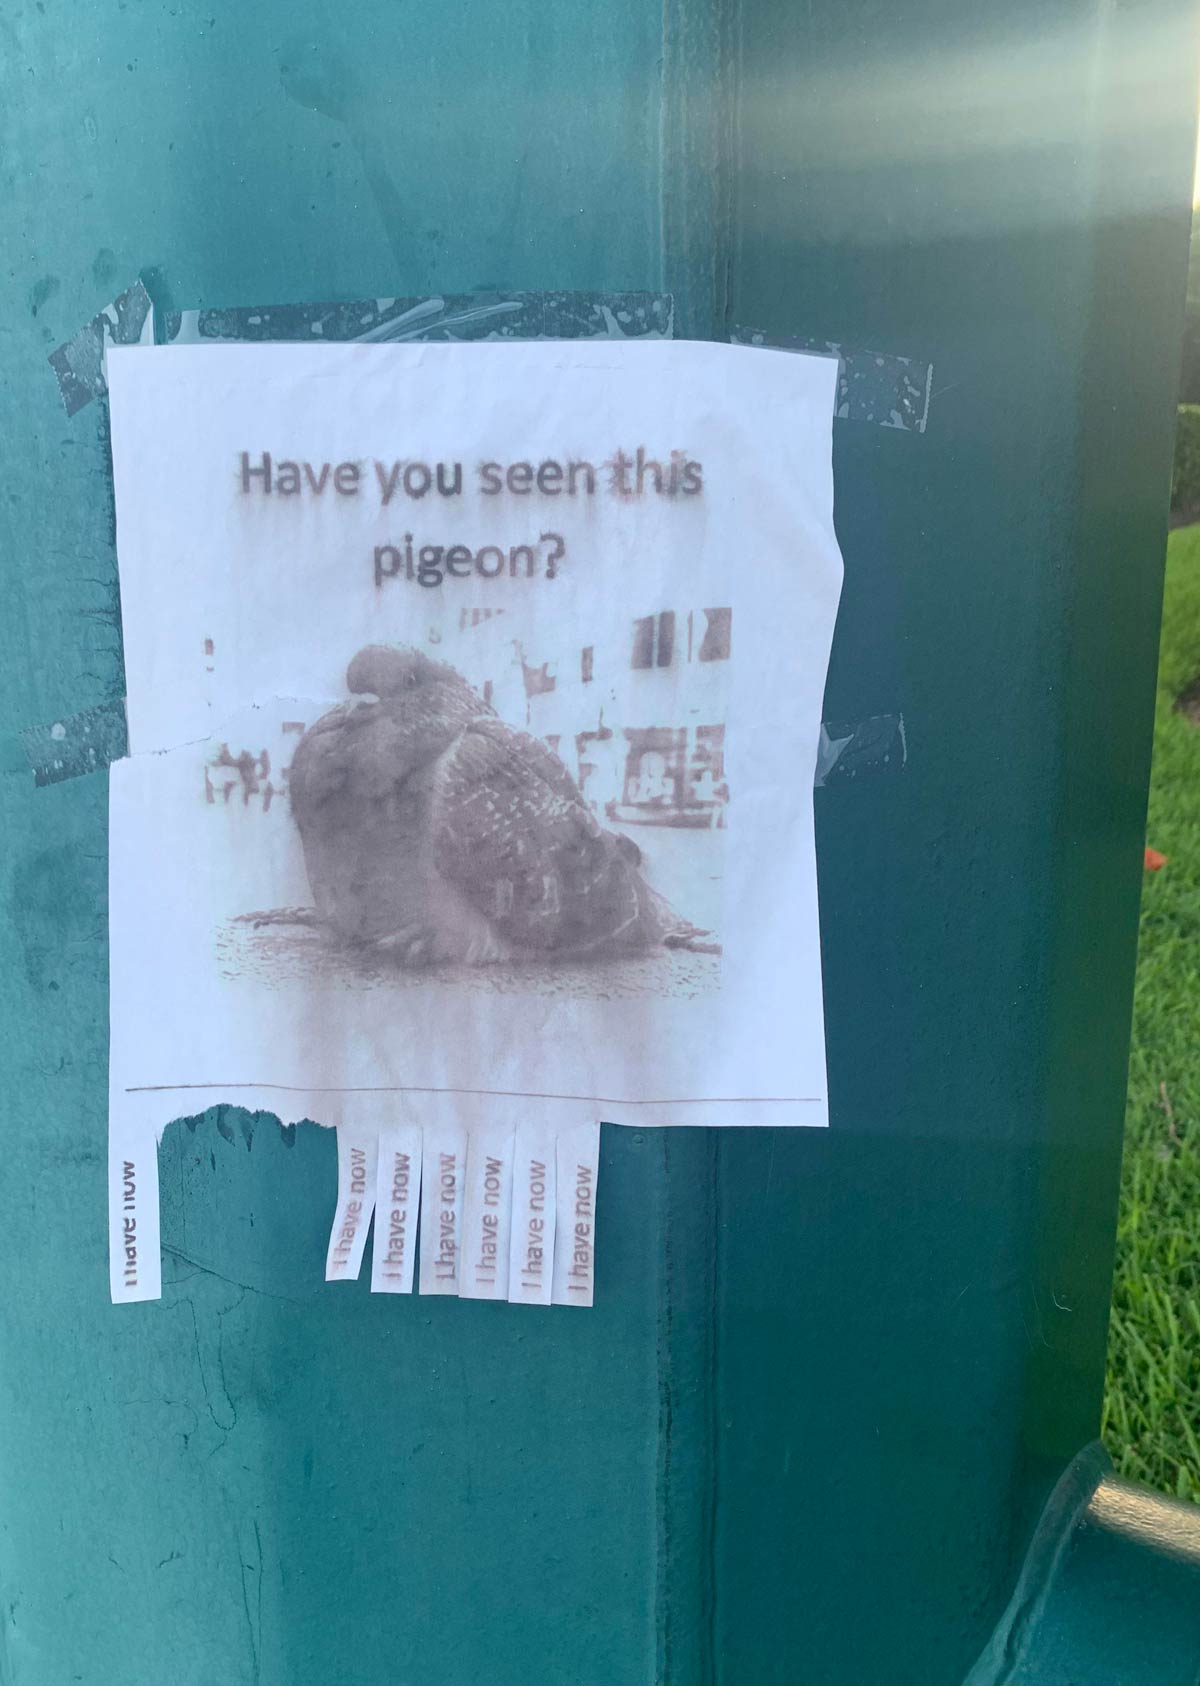 Sign I saw on a lamp post